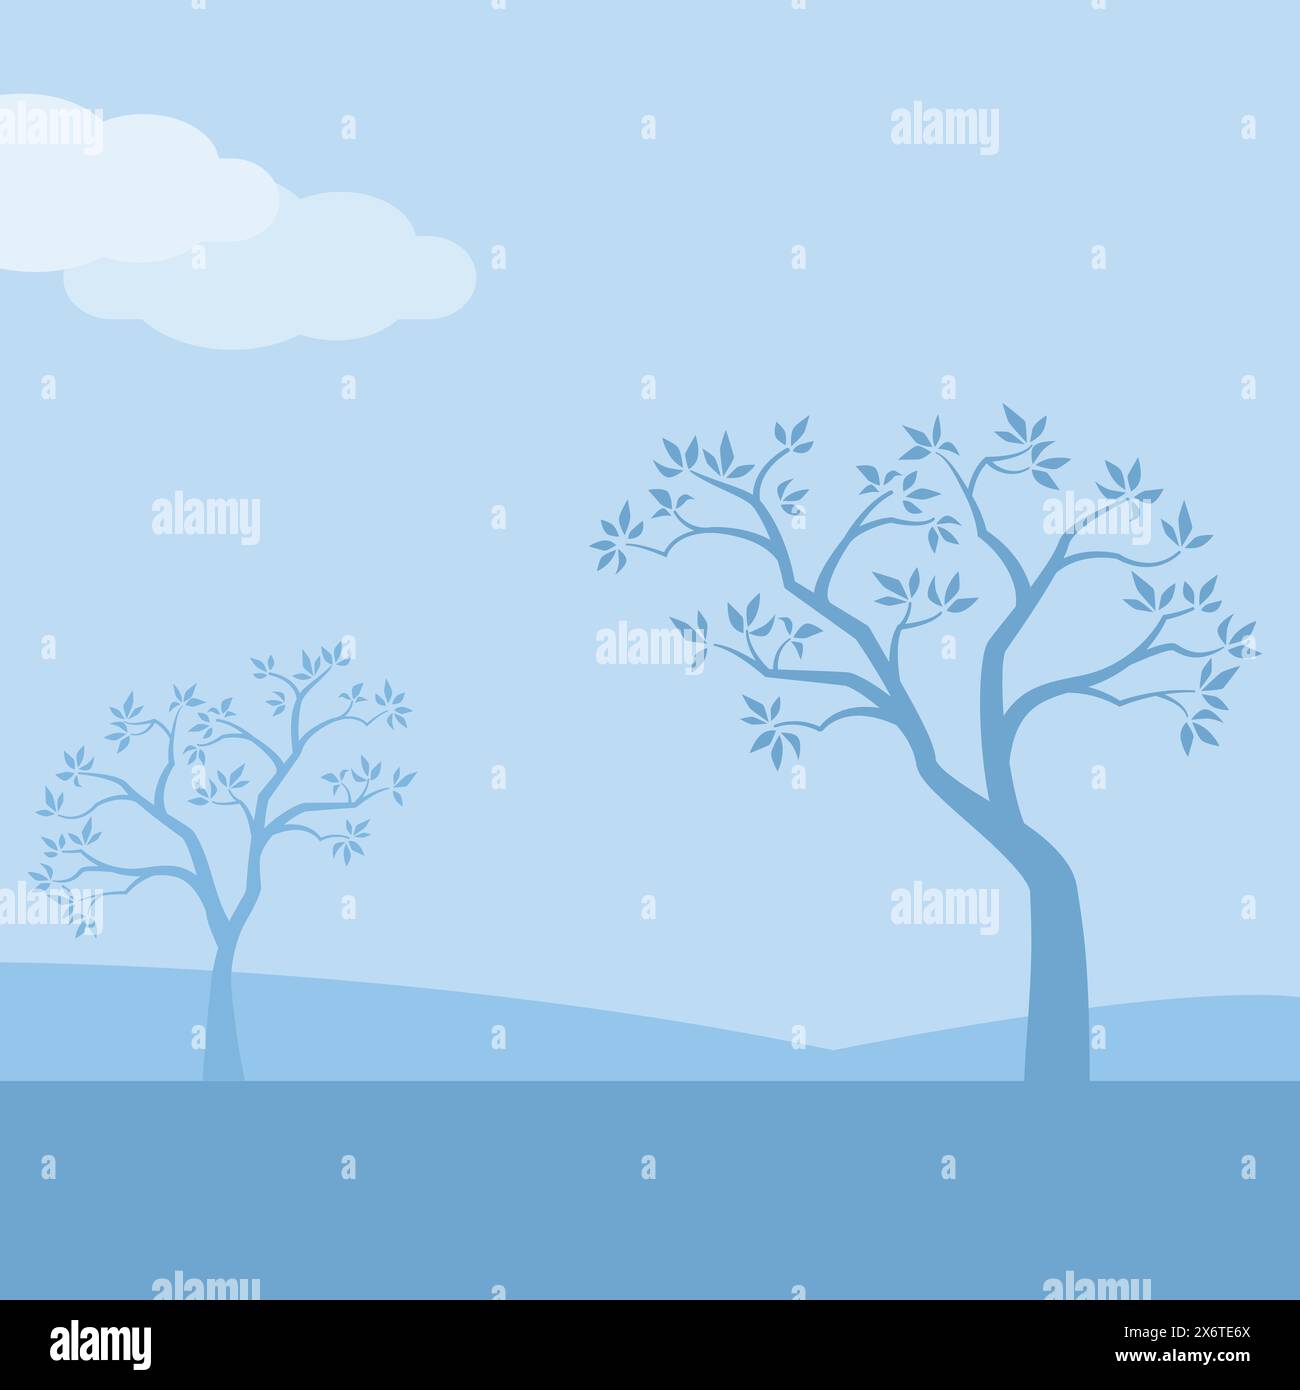 Minimal zen background with trees and sky Stock Vector